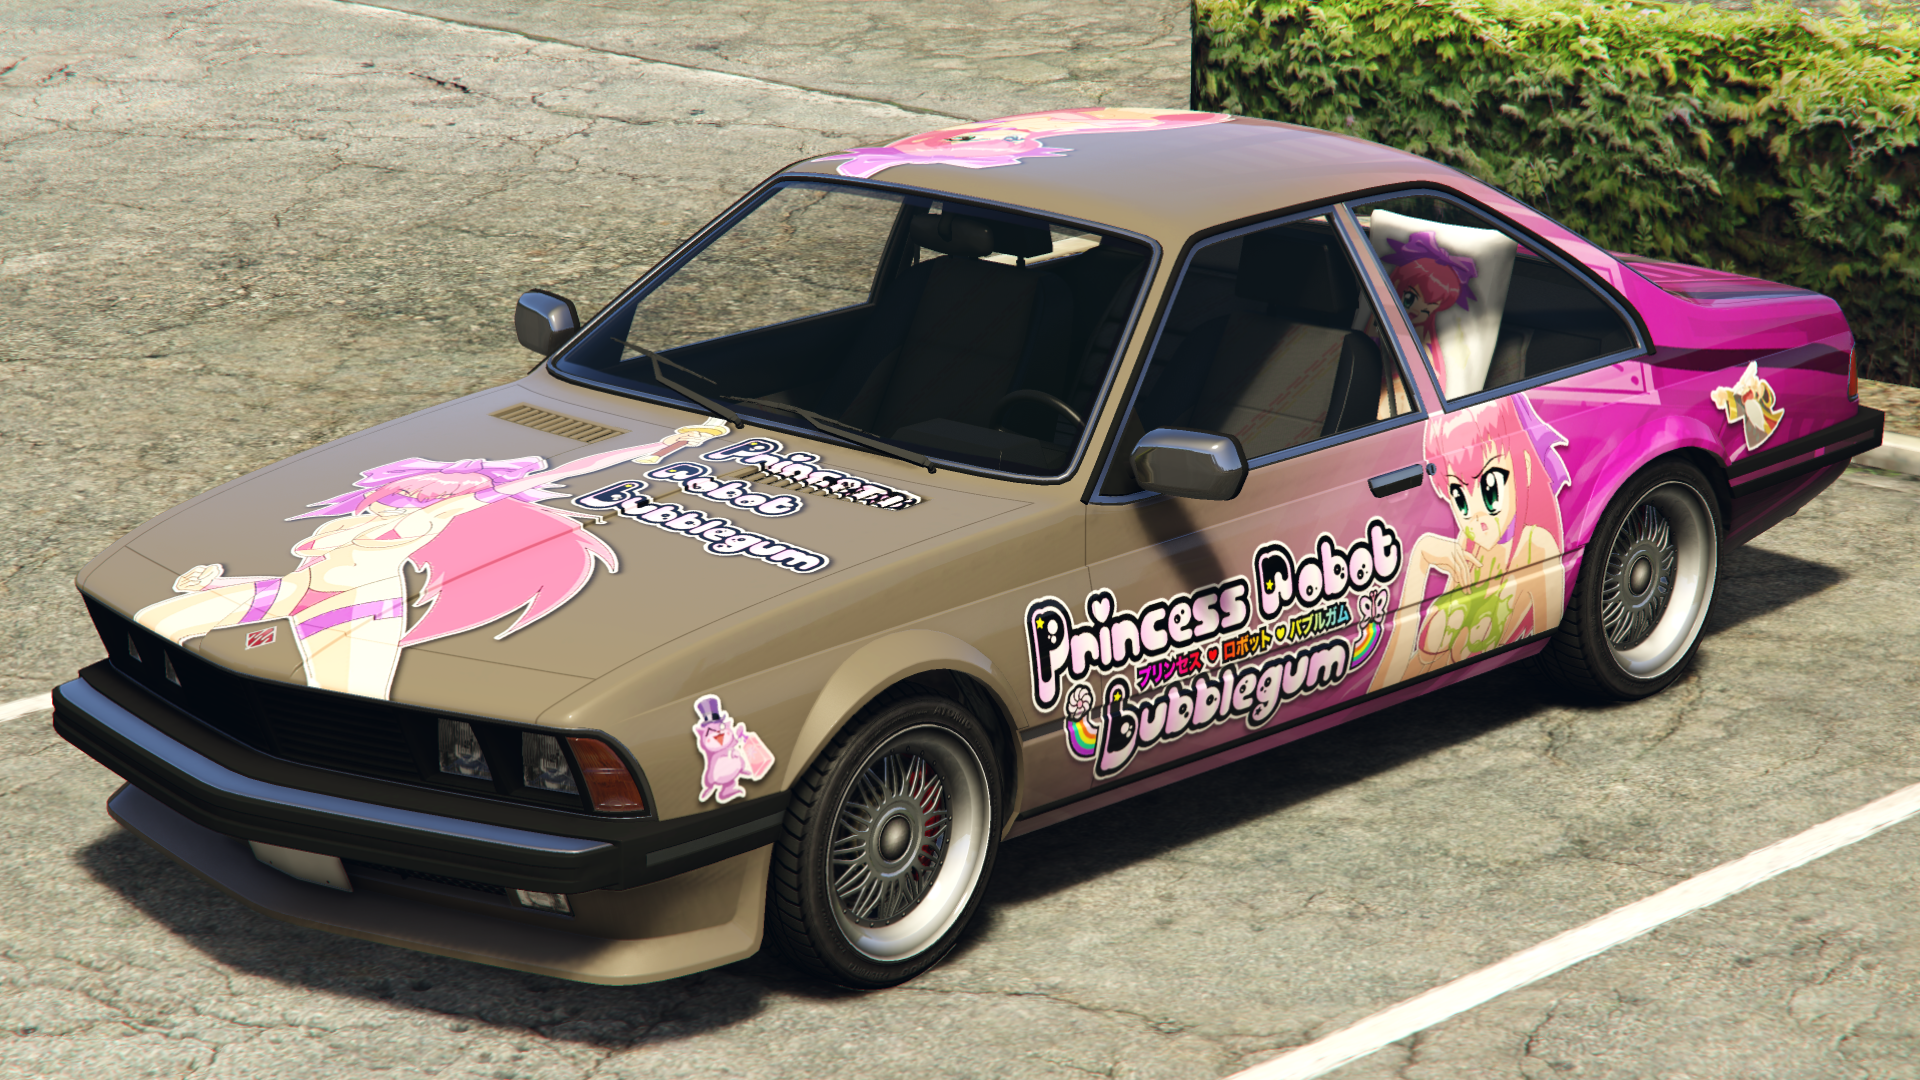 Images Of Gta V All Cars With Anime Livery.